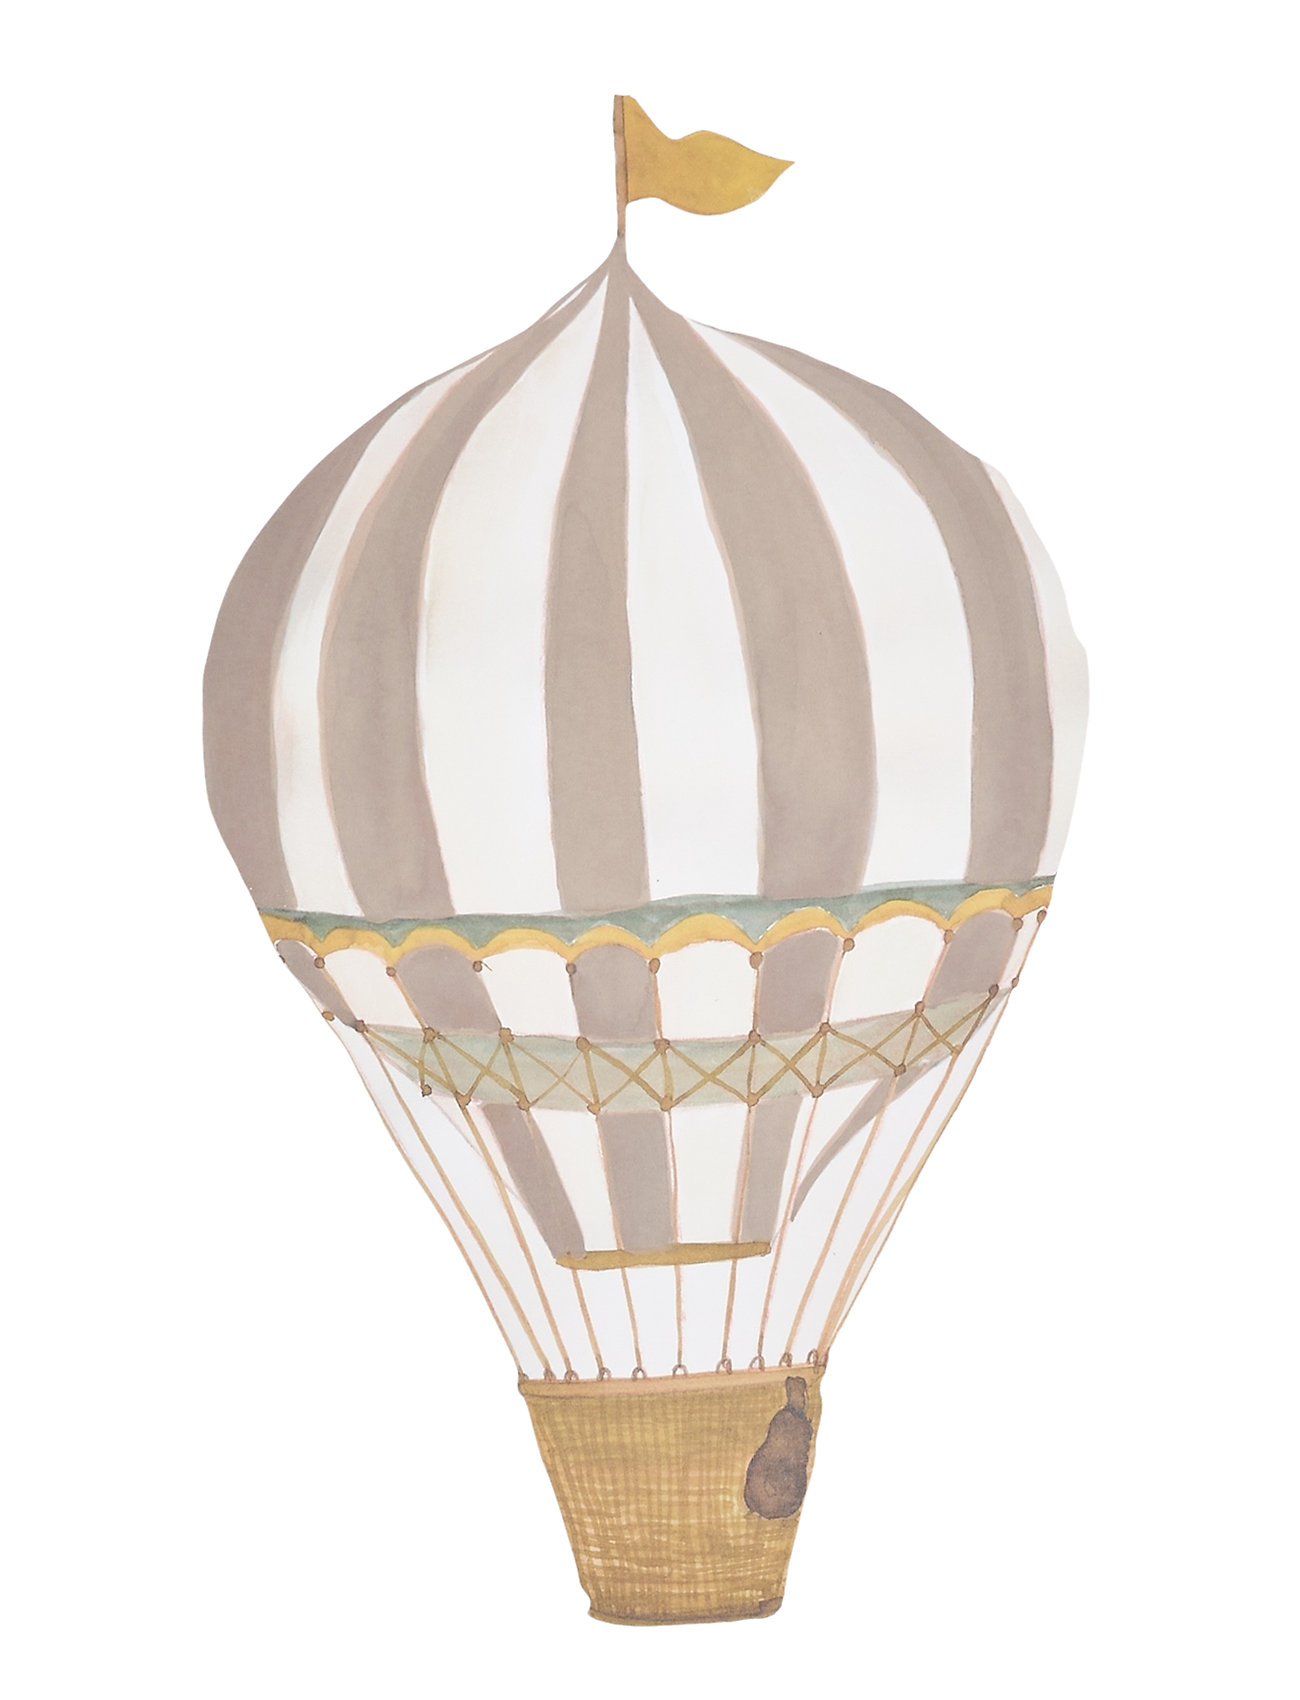 Retro Air Balloon Small Brown Home Kids Decor Wall Stickers Vehicles Brown That's Mine